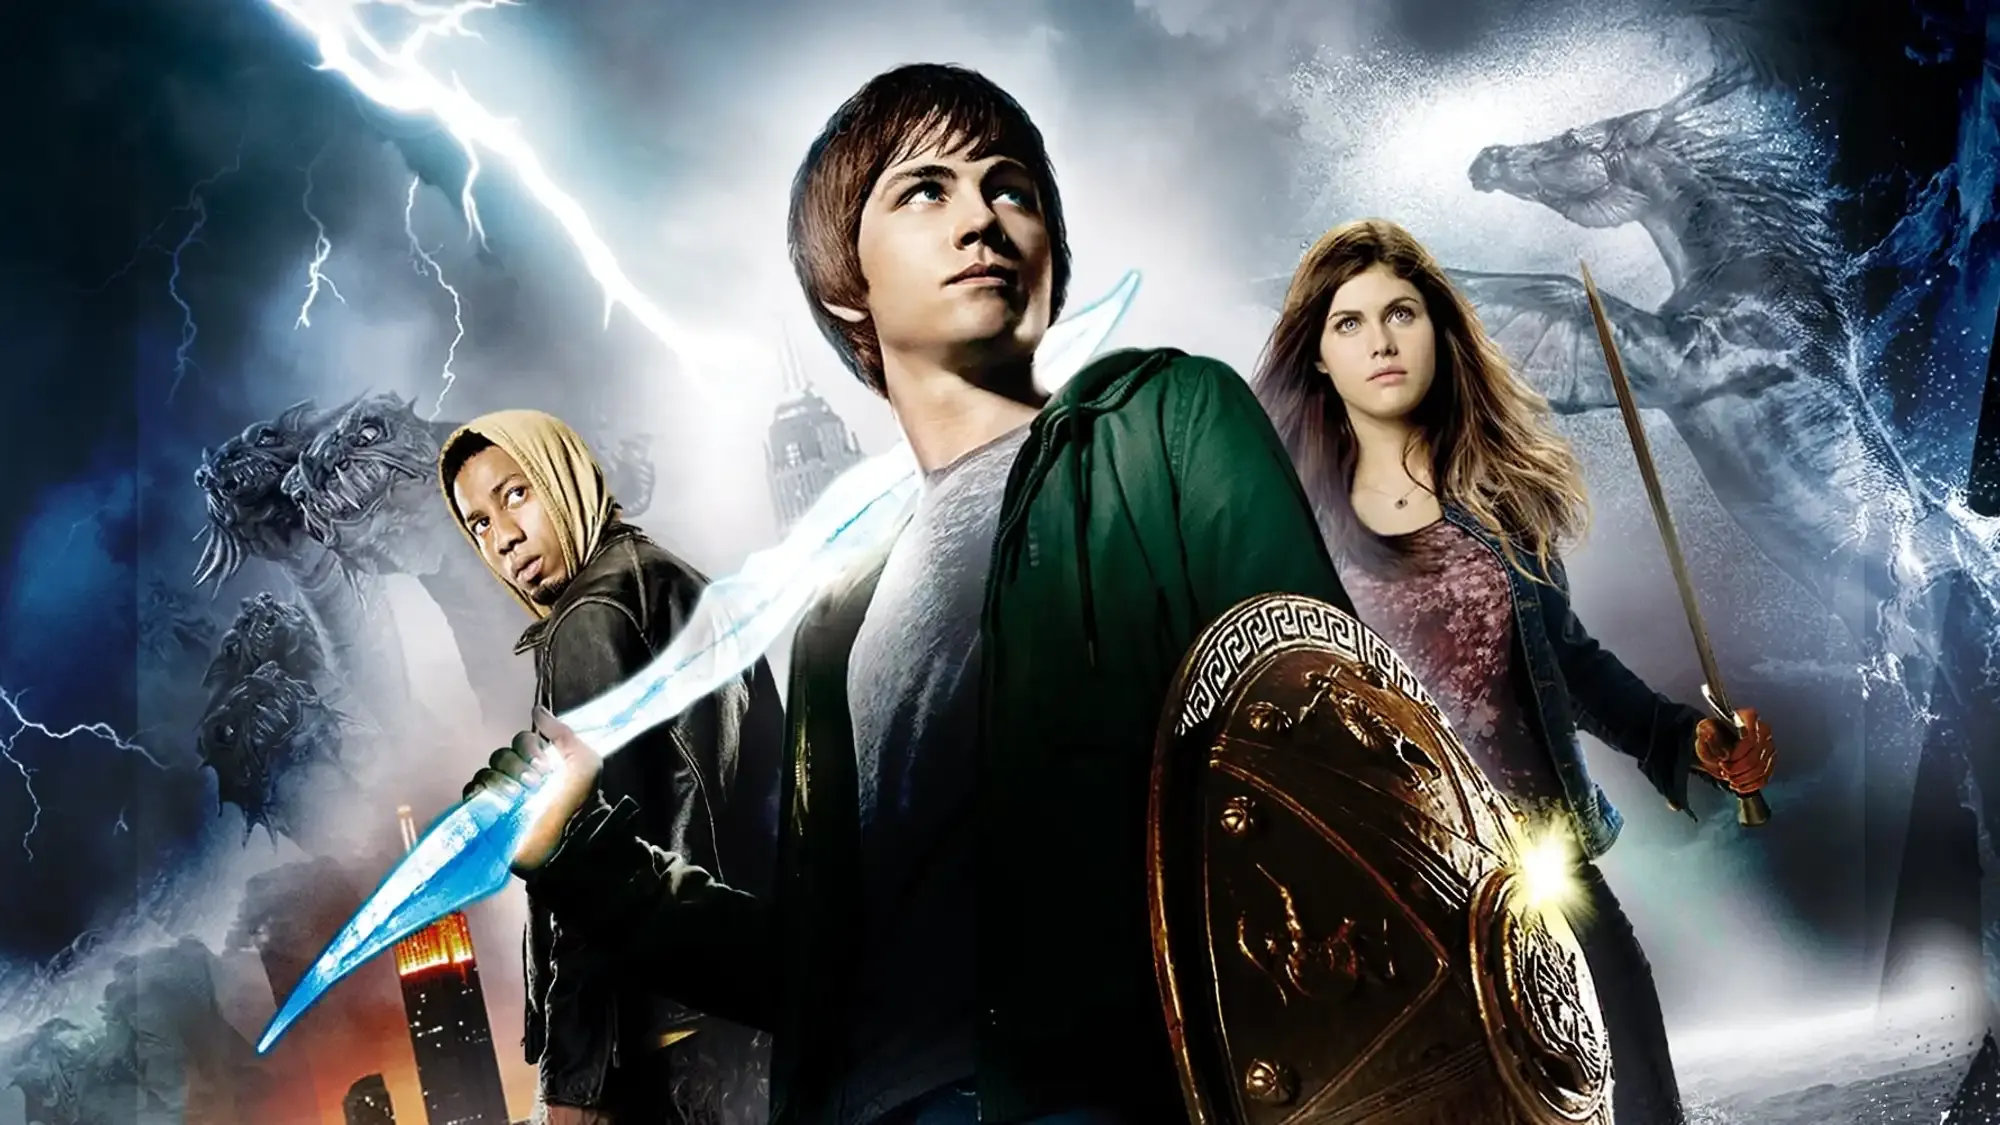 Percy Jackson & the Olympians: The Lightning Thief movie review